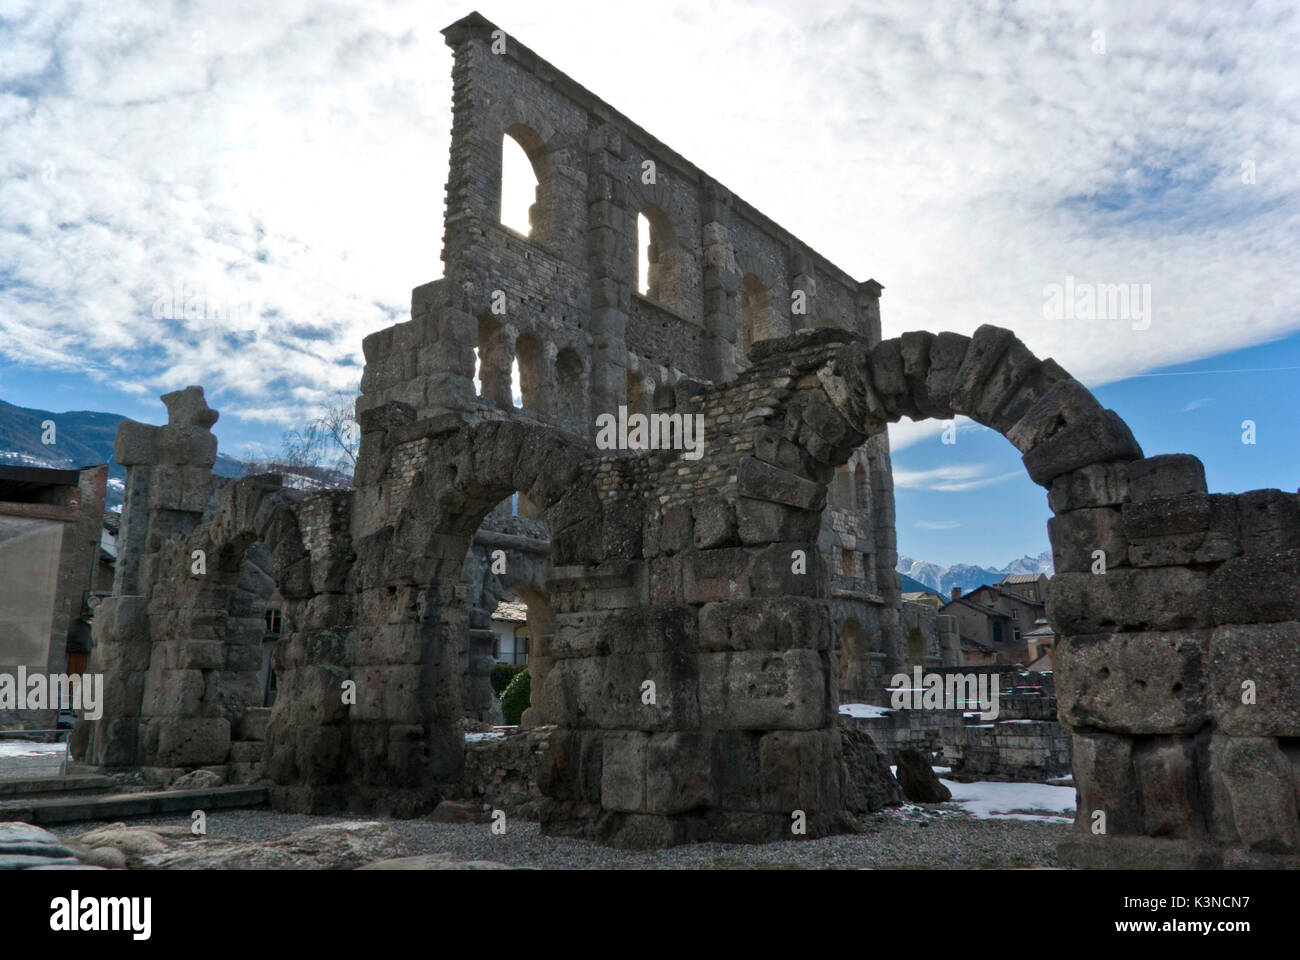 Roman Theater with its arches are still well preserved in the center of the Aosta city. Aosta Valley, Italy Stock Photo